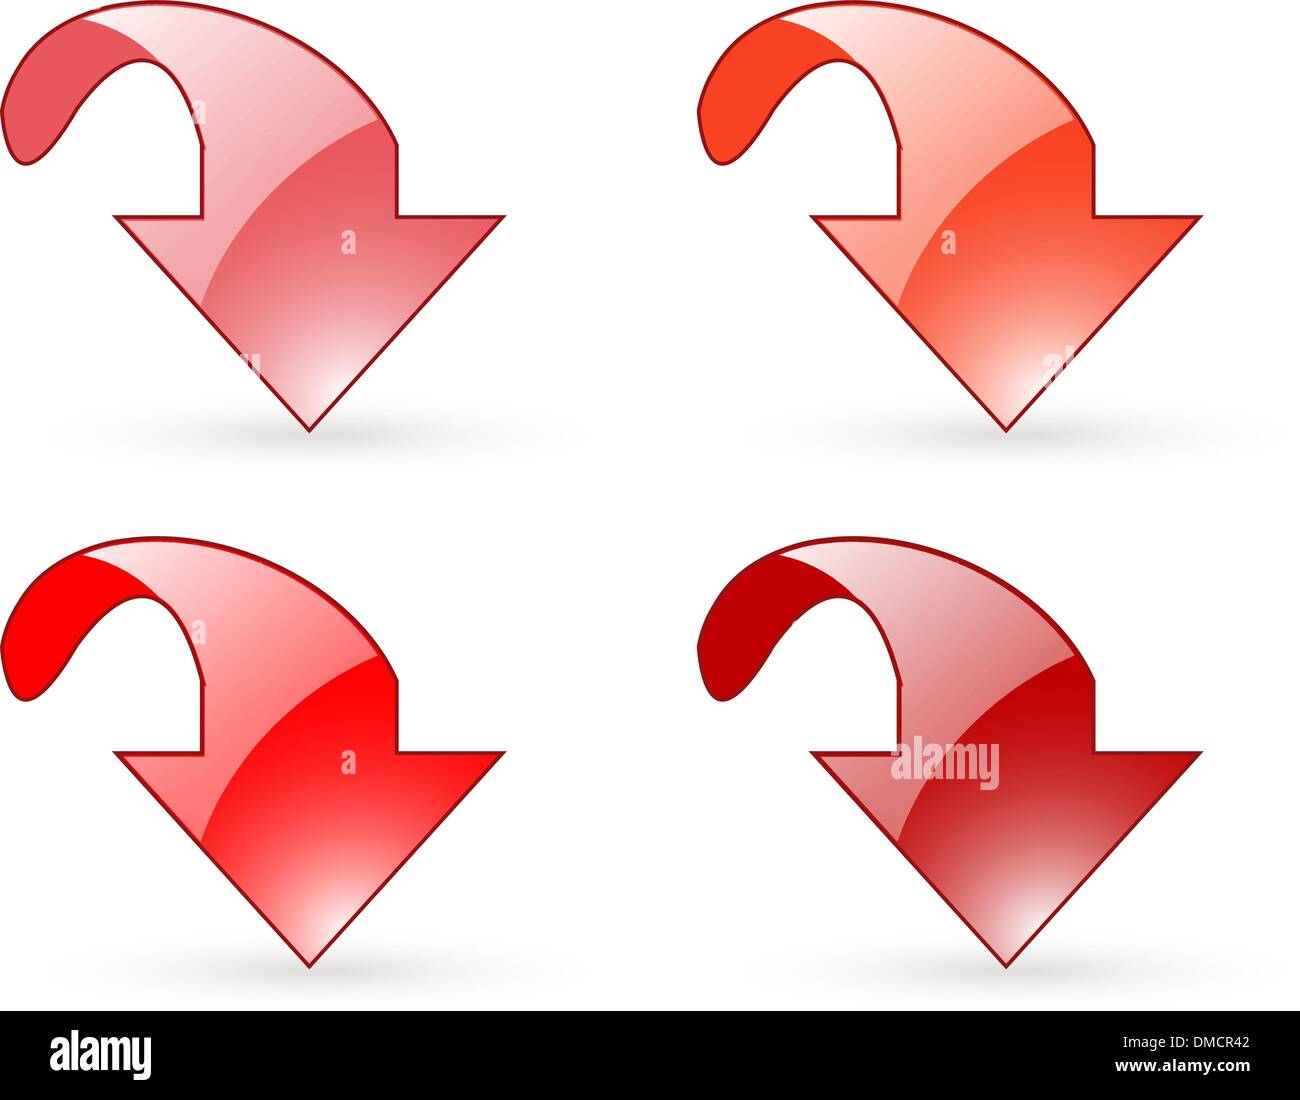 arrow download red button icons Stock Vector